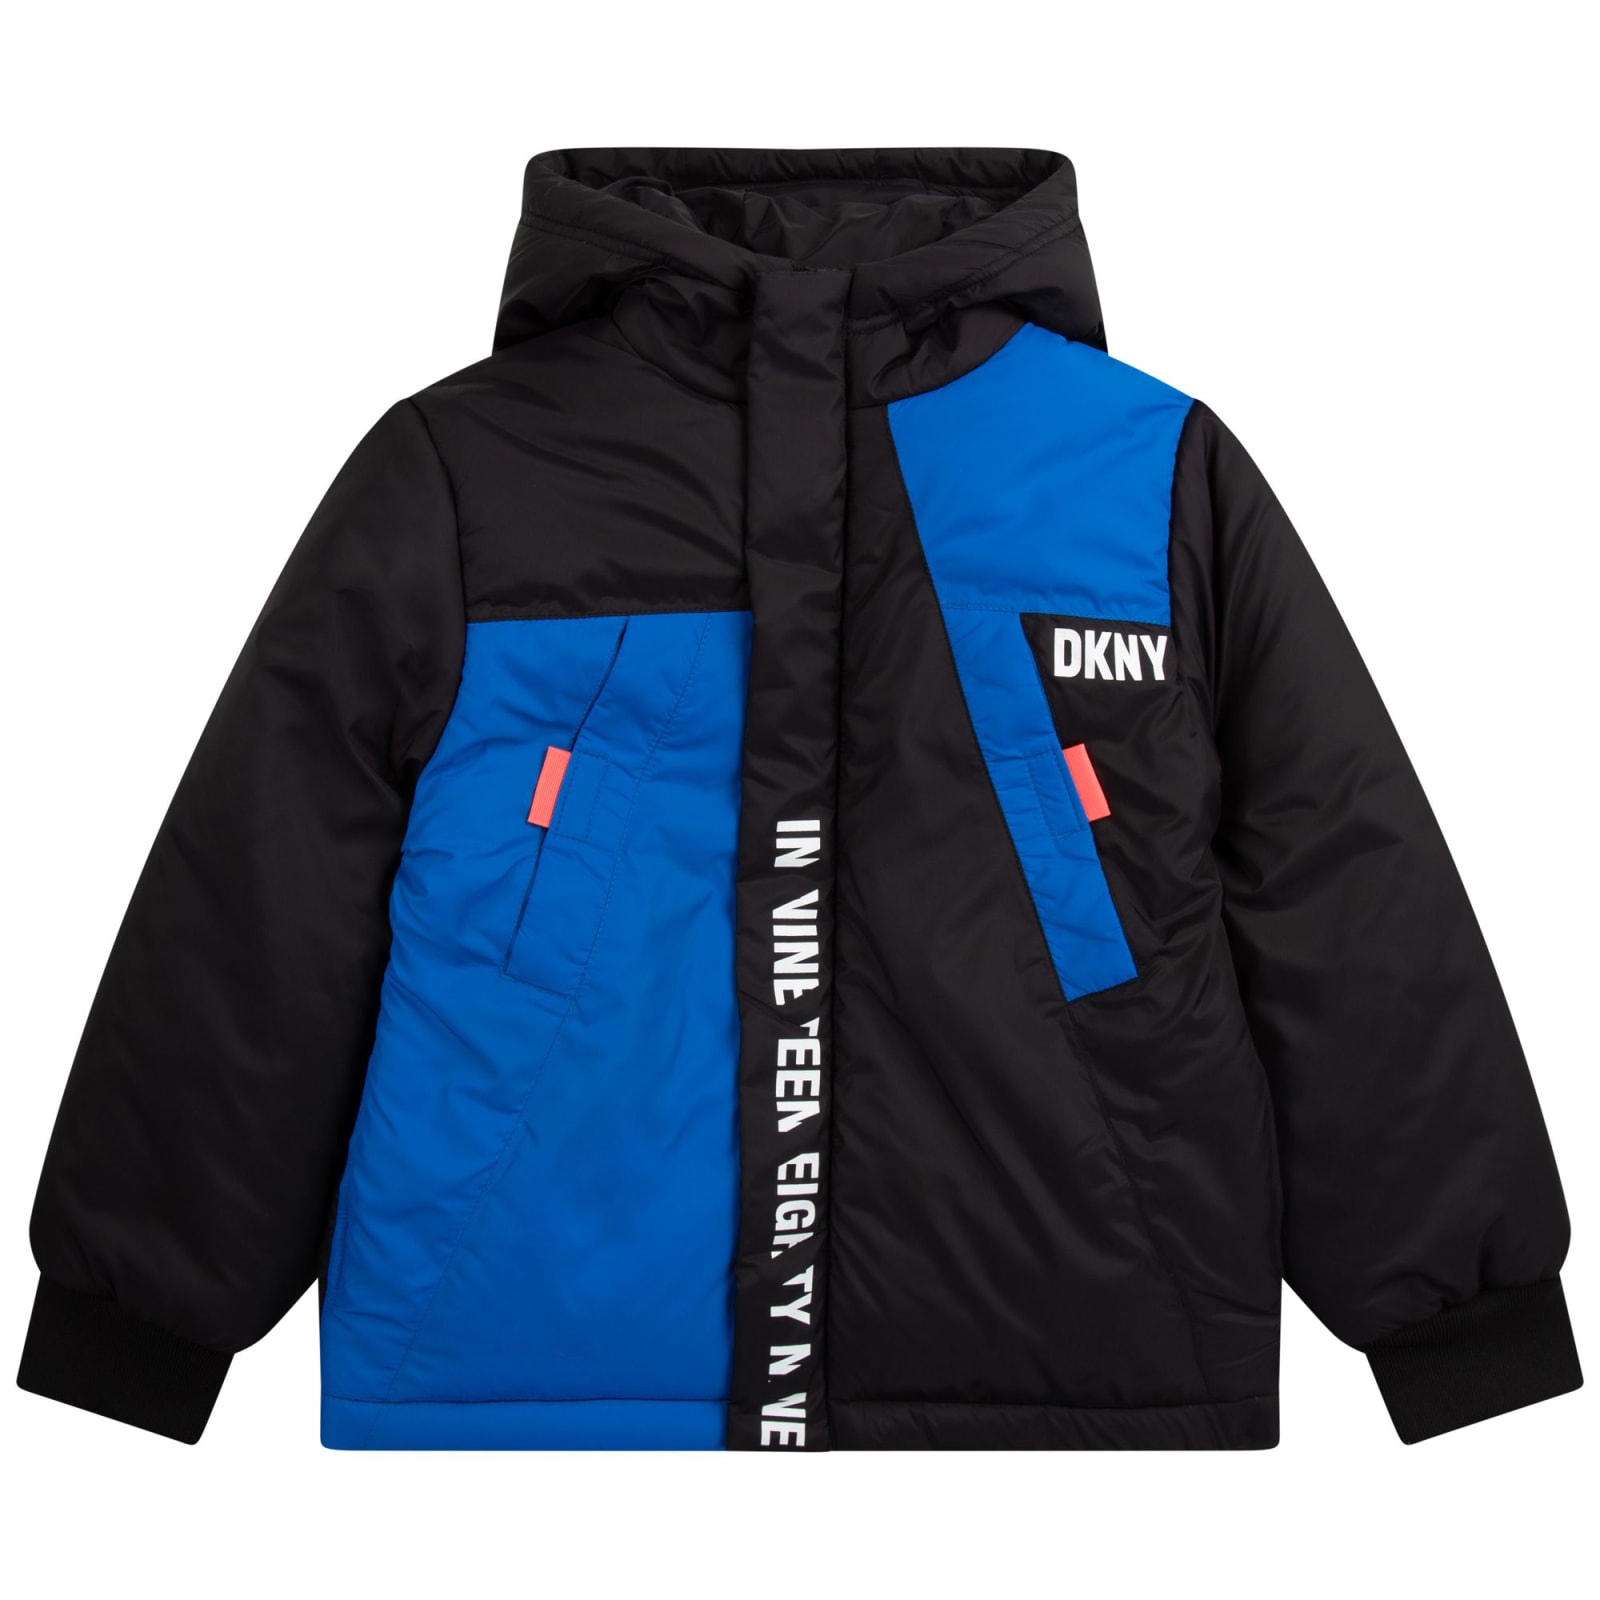 DKNY JACKET WITH COLOR-BLOCK DESIGN